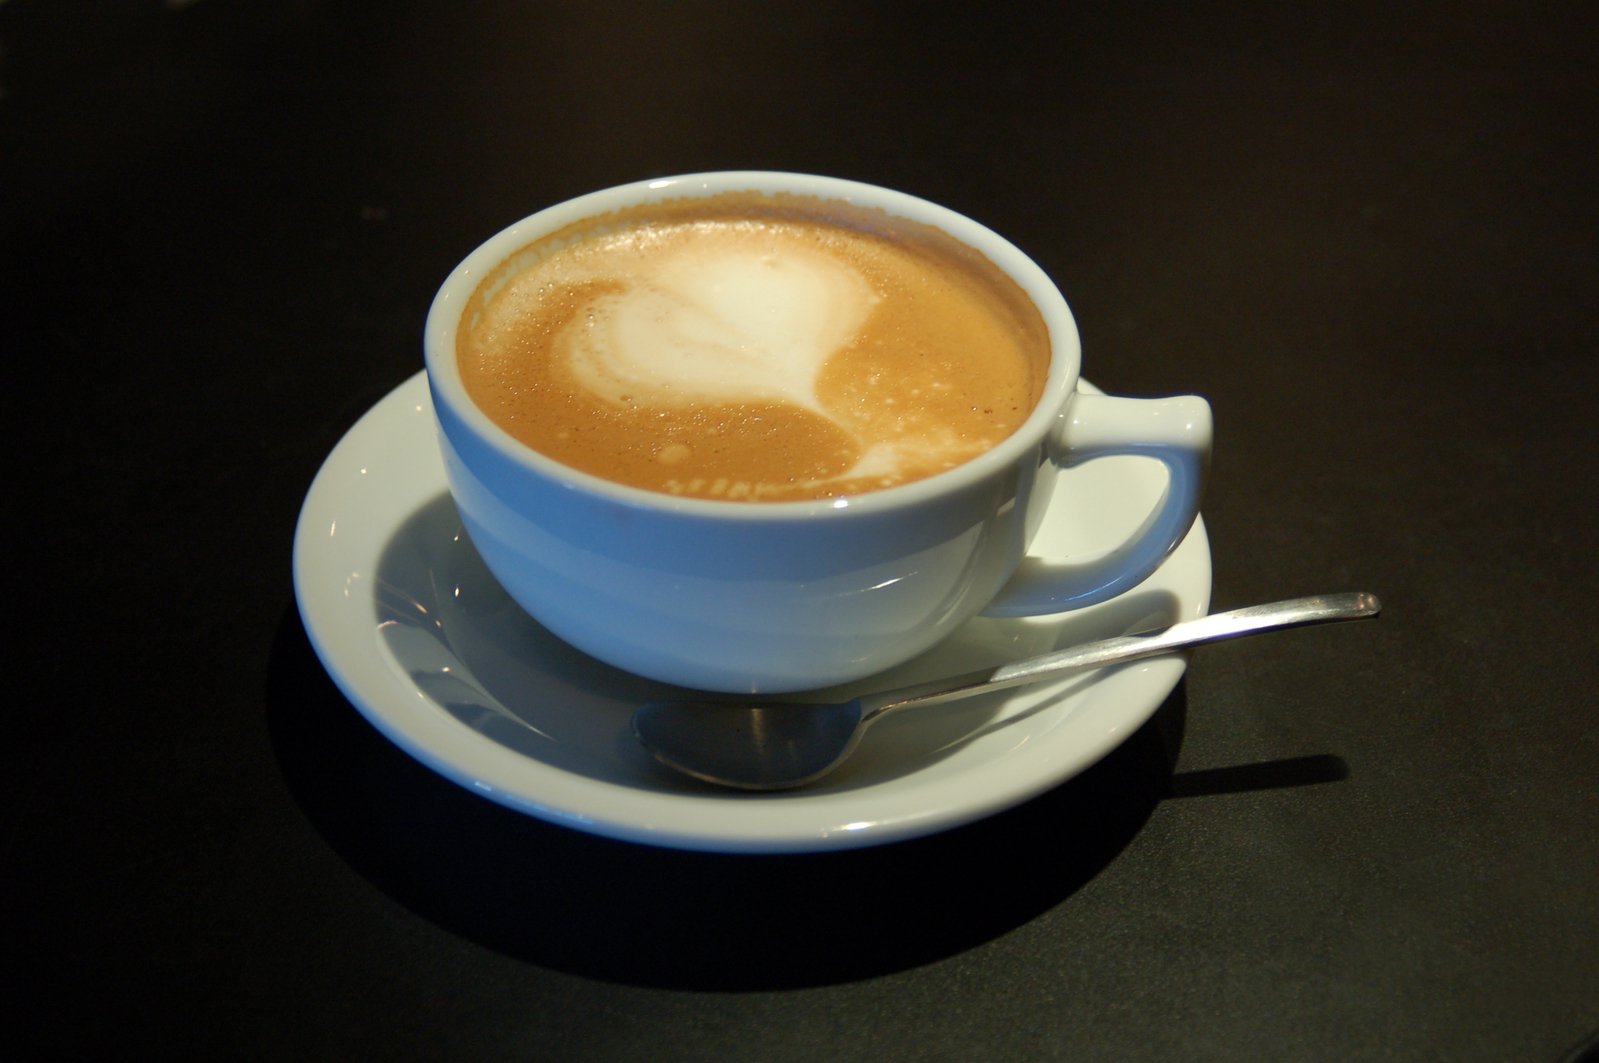 there is no picture to describe, this appears to be of a cup of coffee